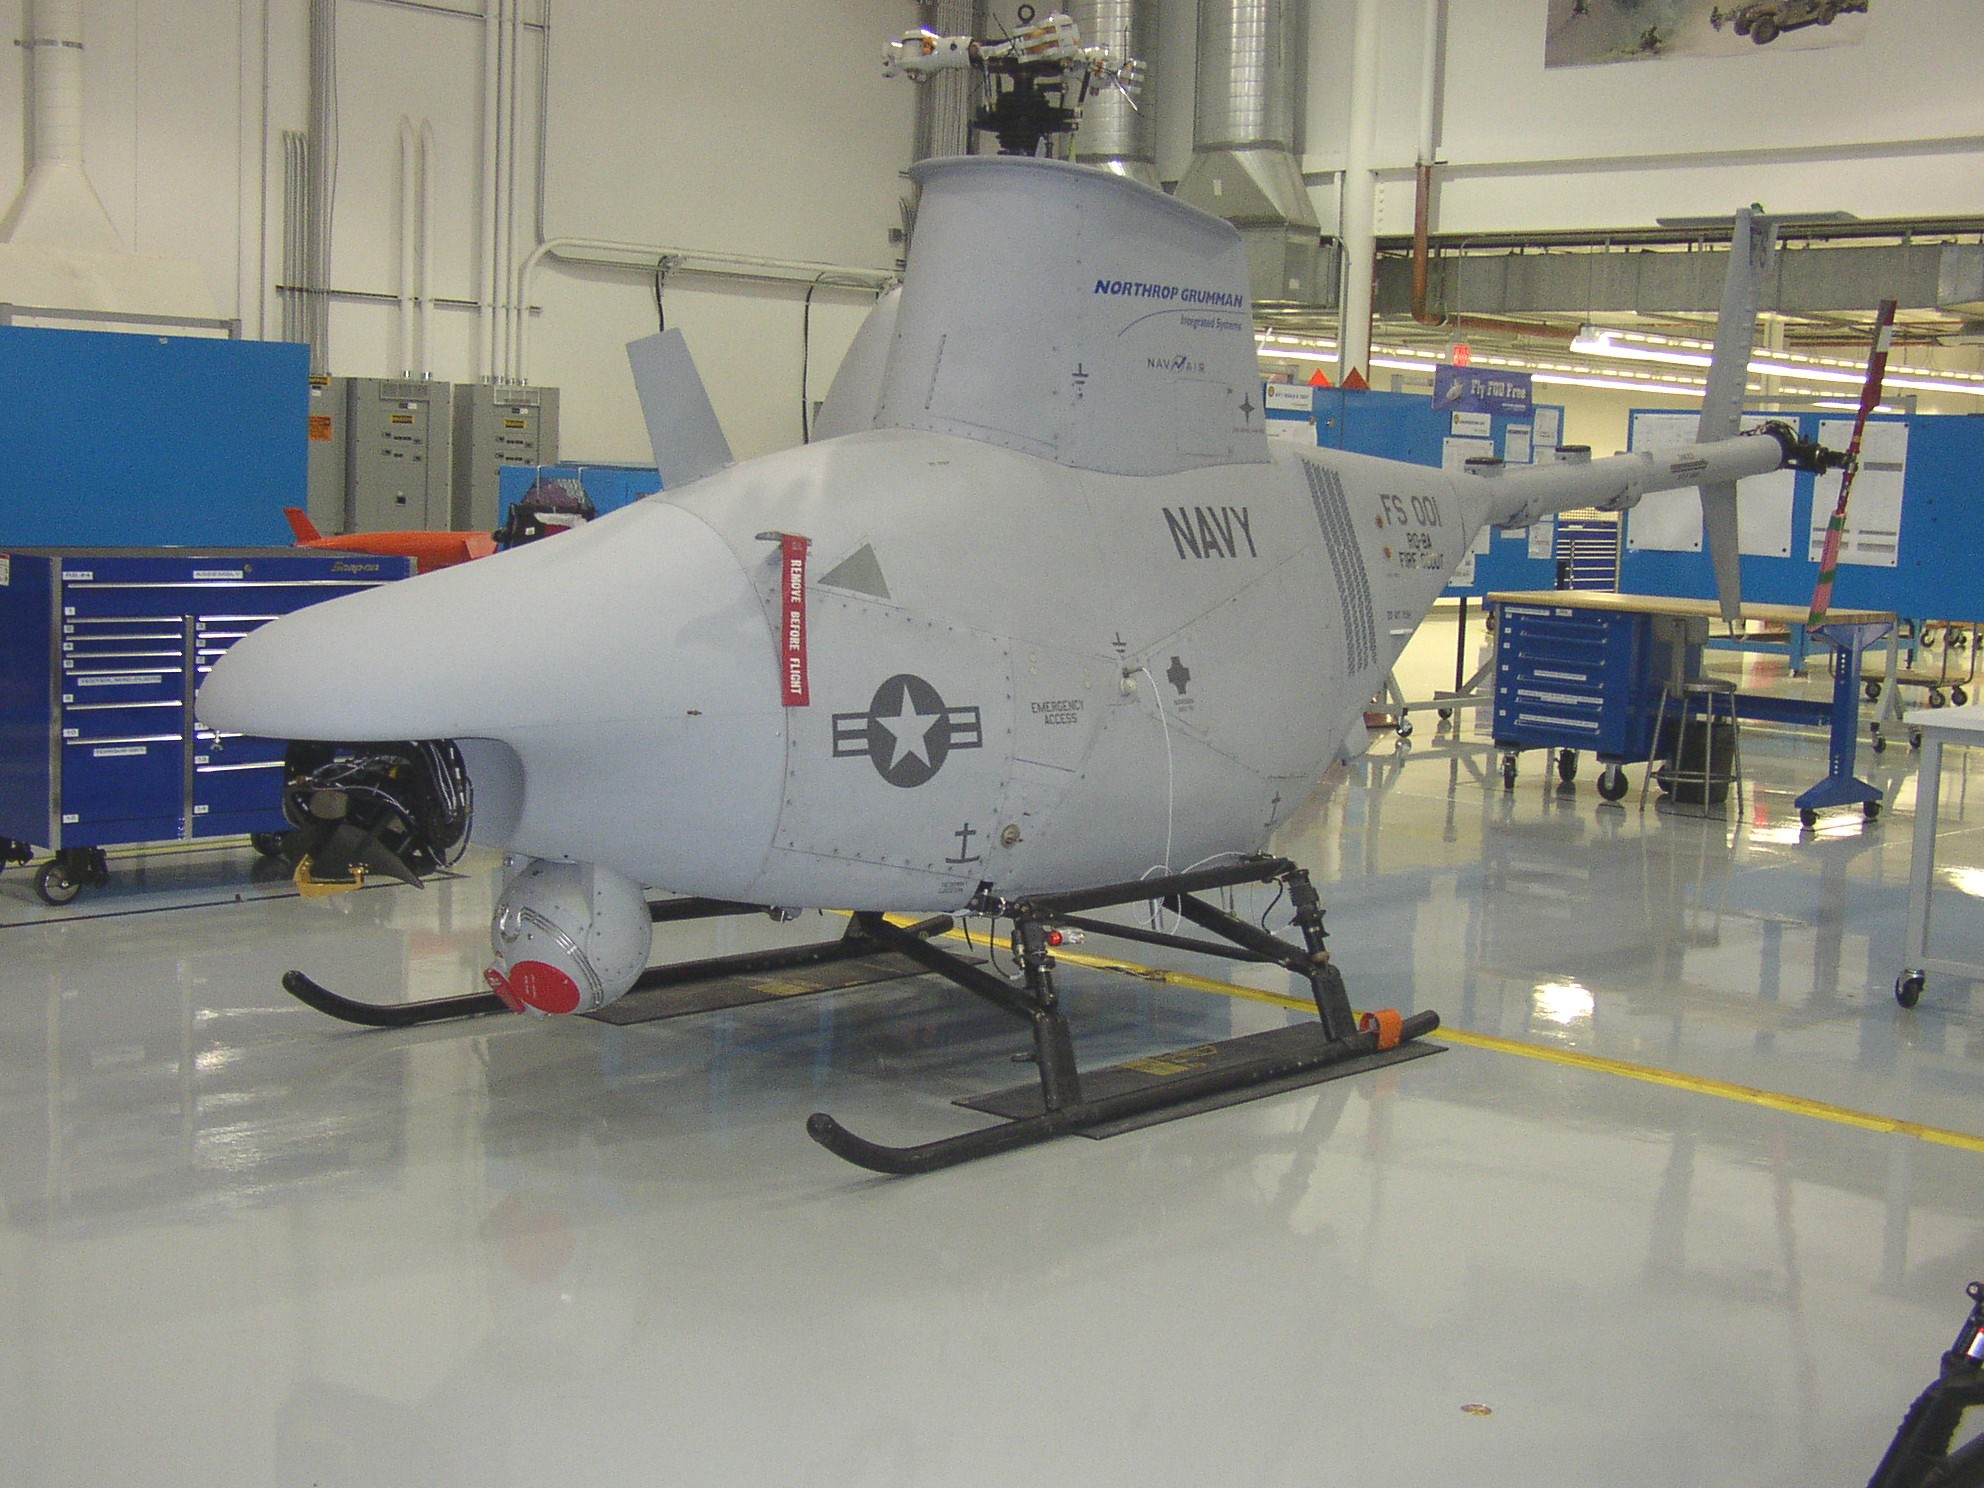 NG Completes Integration of Tactical Synthetic Aperture Radar for WATCHKEEPER UAV Application